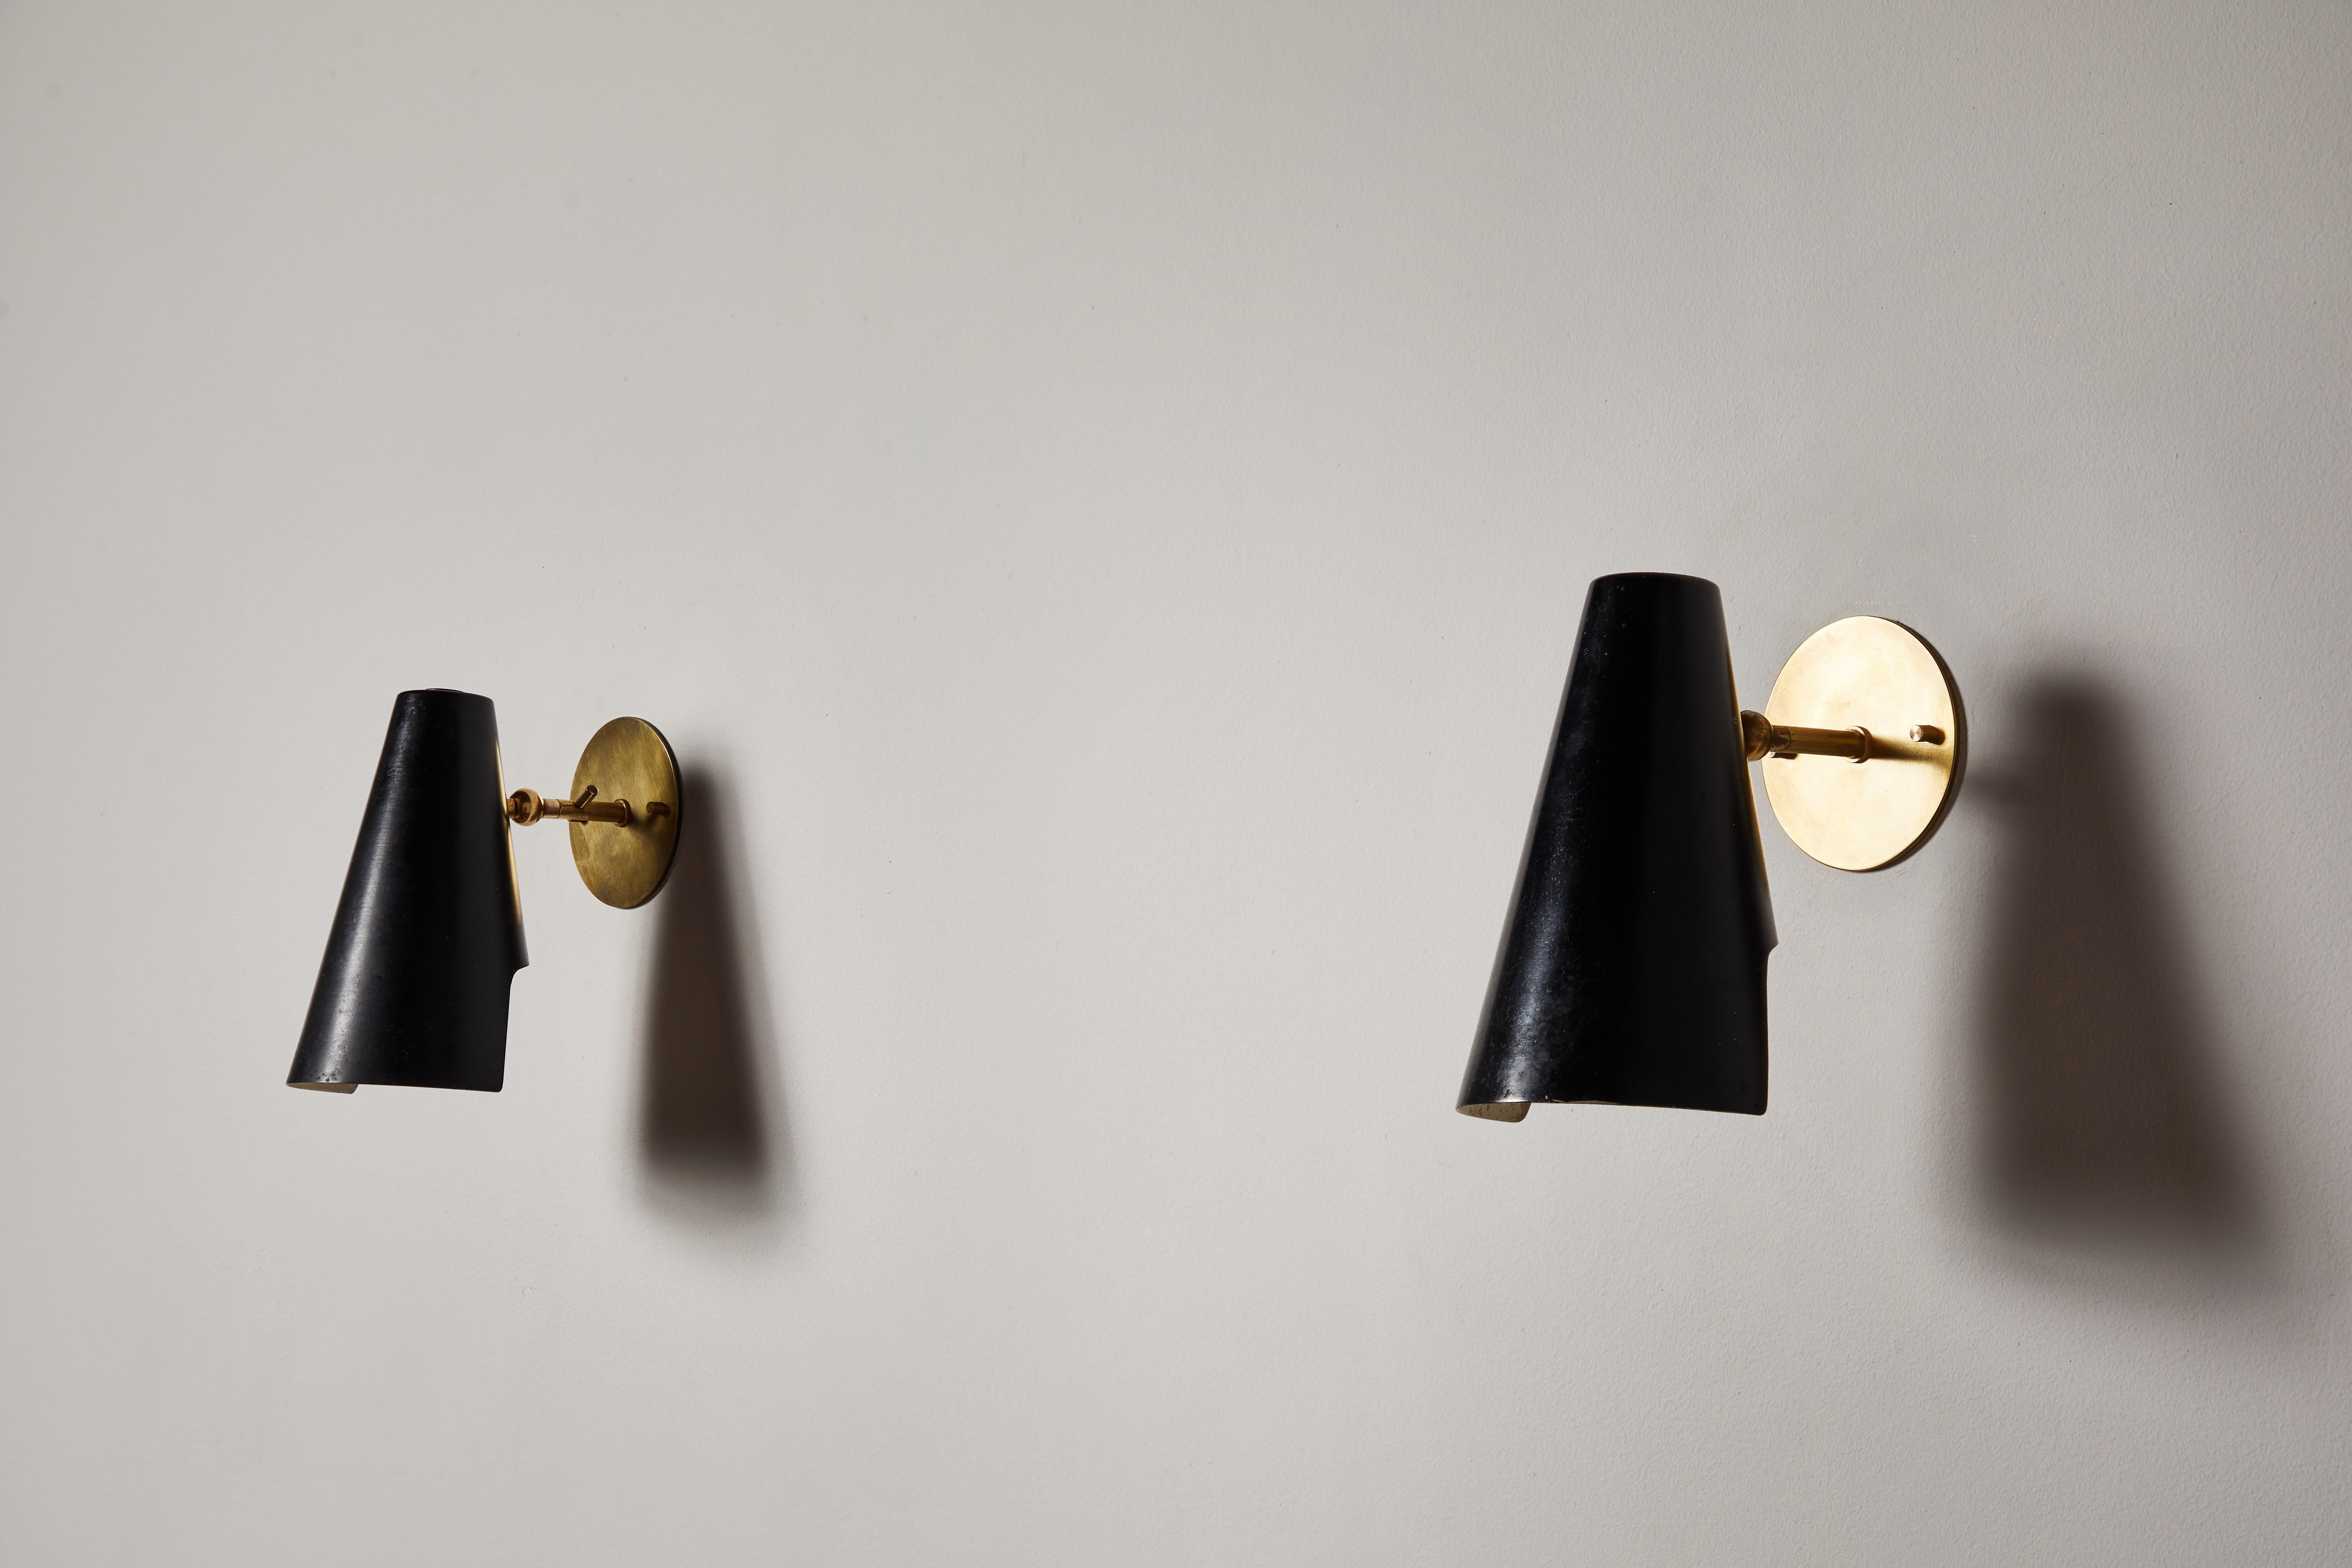 Metal Pair of Sconces by Gino Sarfatti for Arteluce